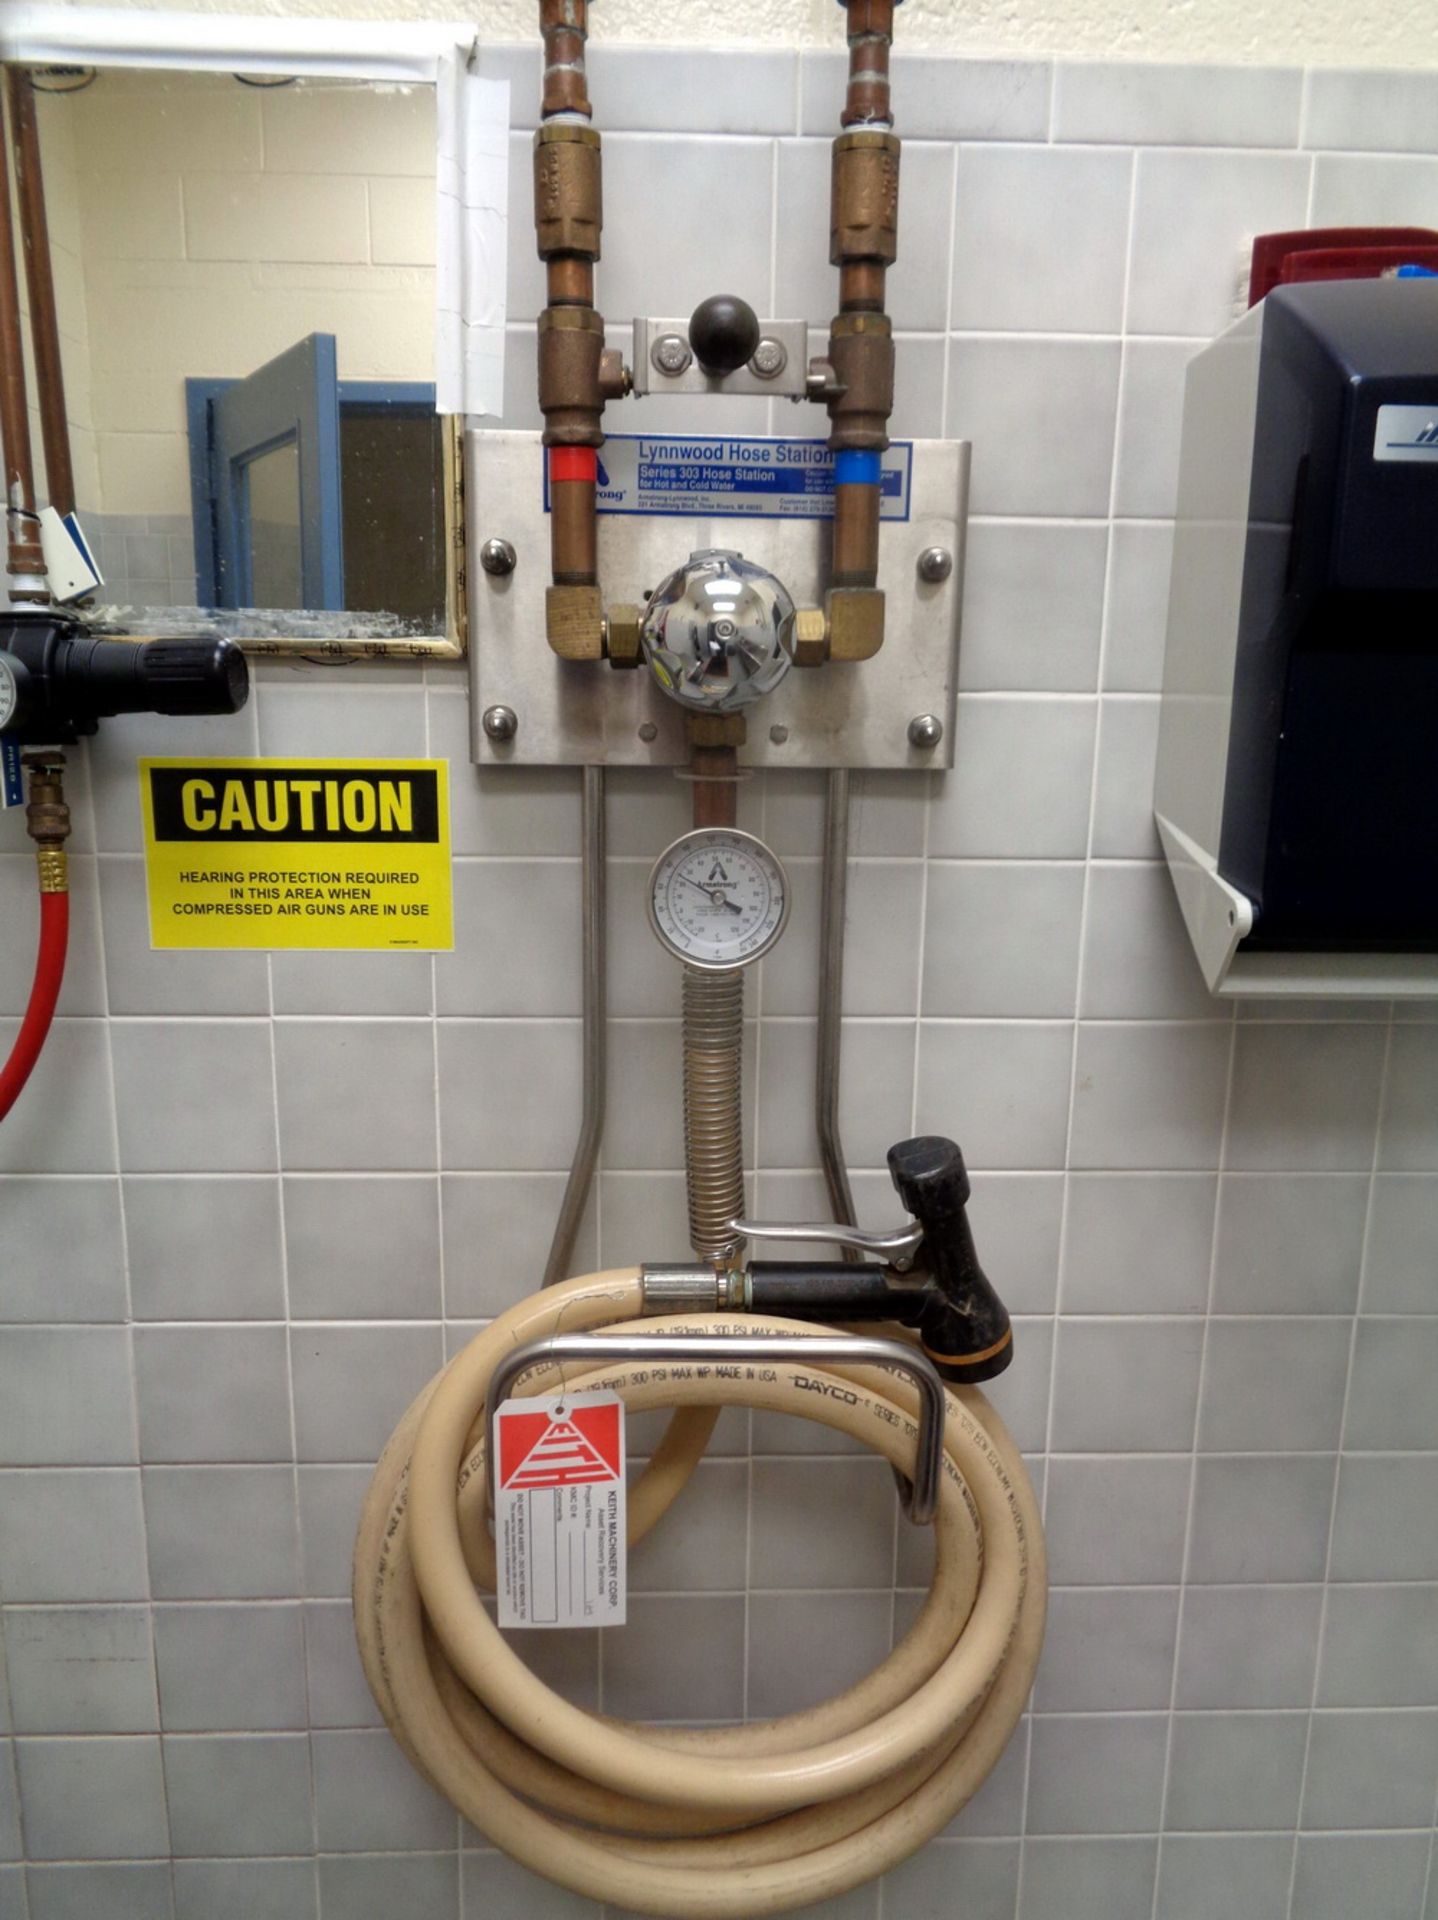 (1) Lynnwood Hose Station Series 303 for hot/cold water